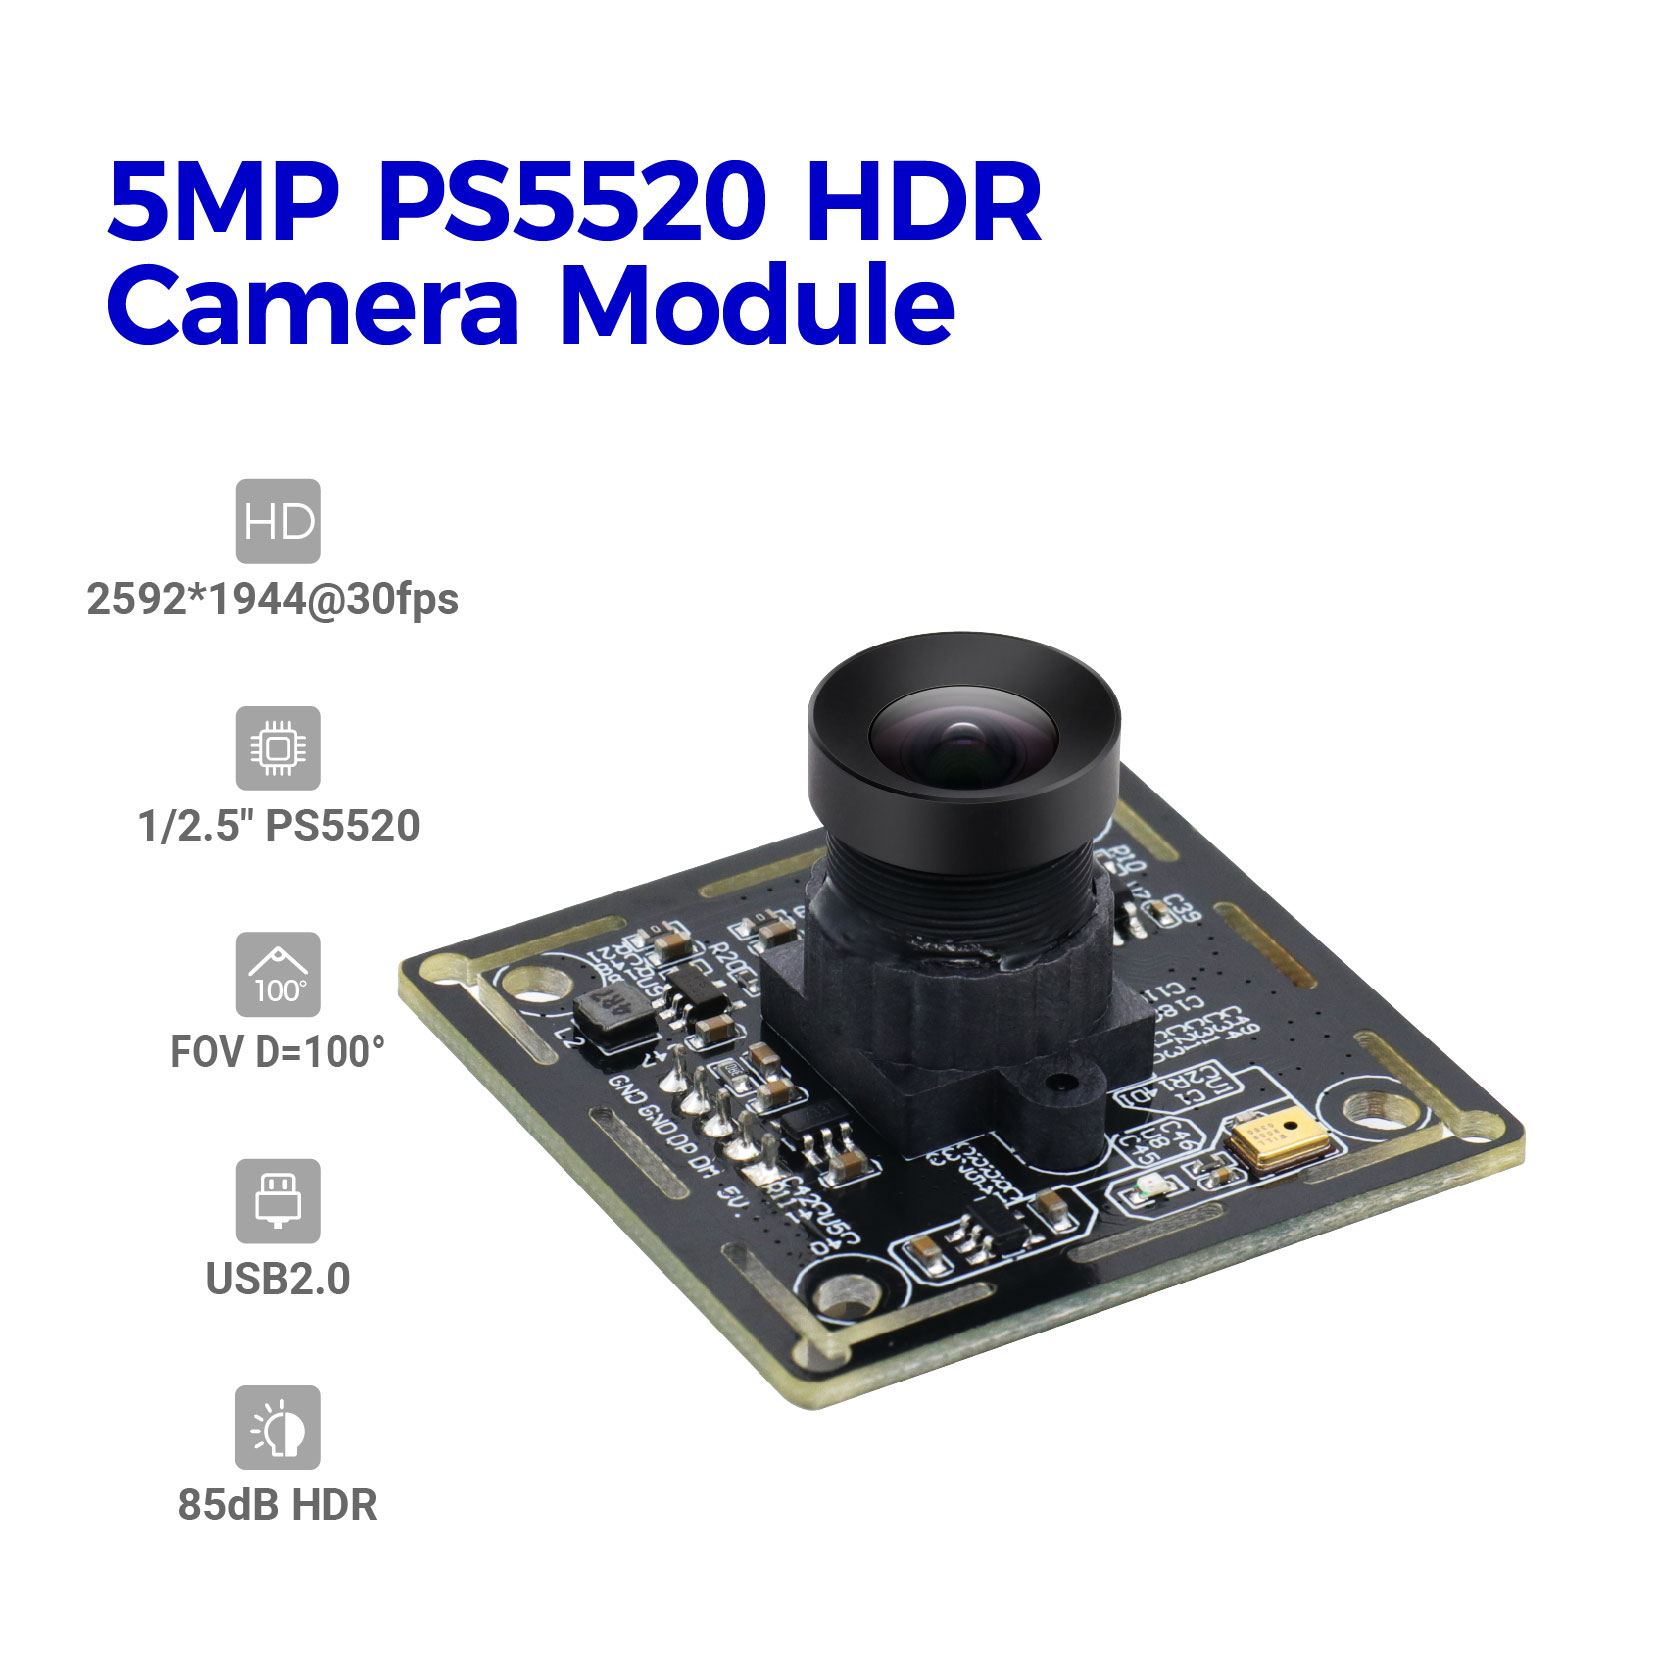 Fixed Competitive Price 1/2.5′ ′ CMOS Sensor HD 2MP 5MP HDR WDR Camera Module for Face Recoginition